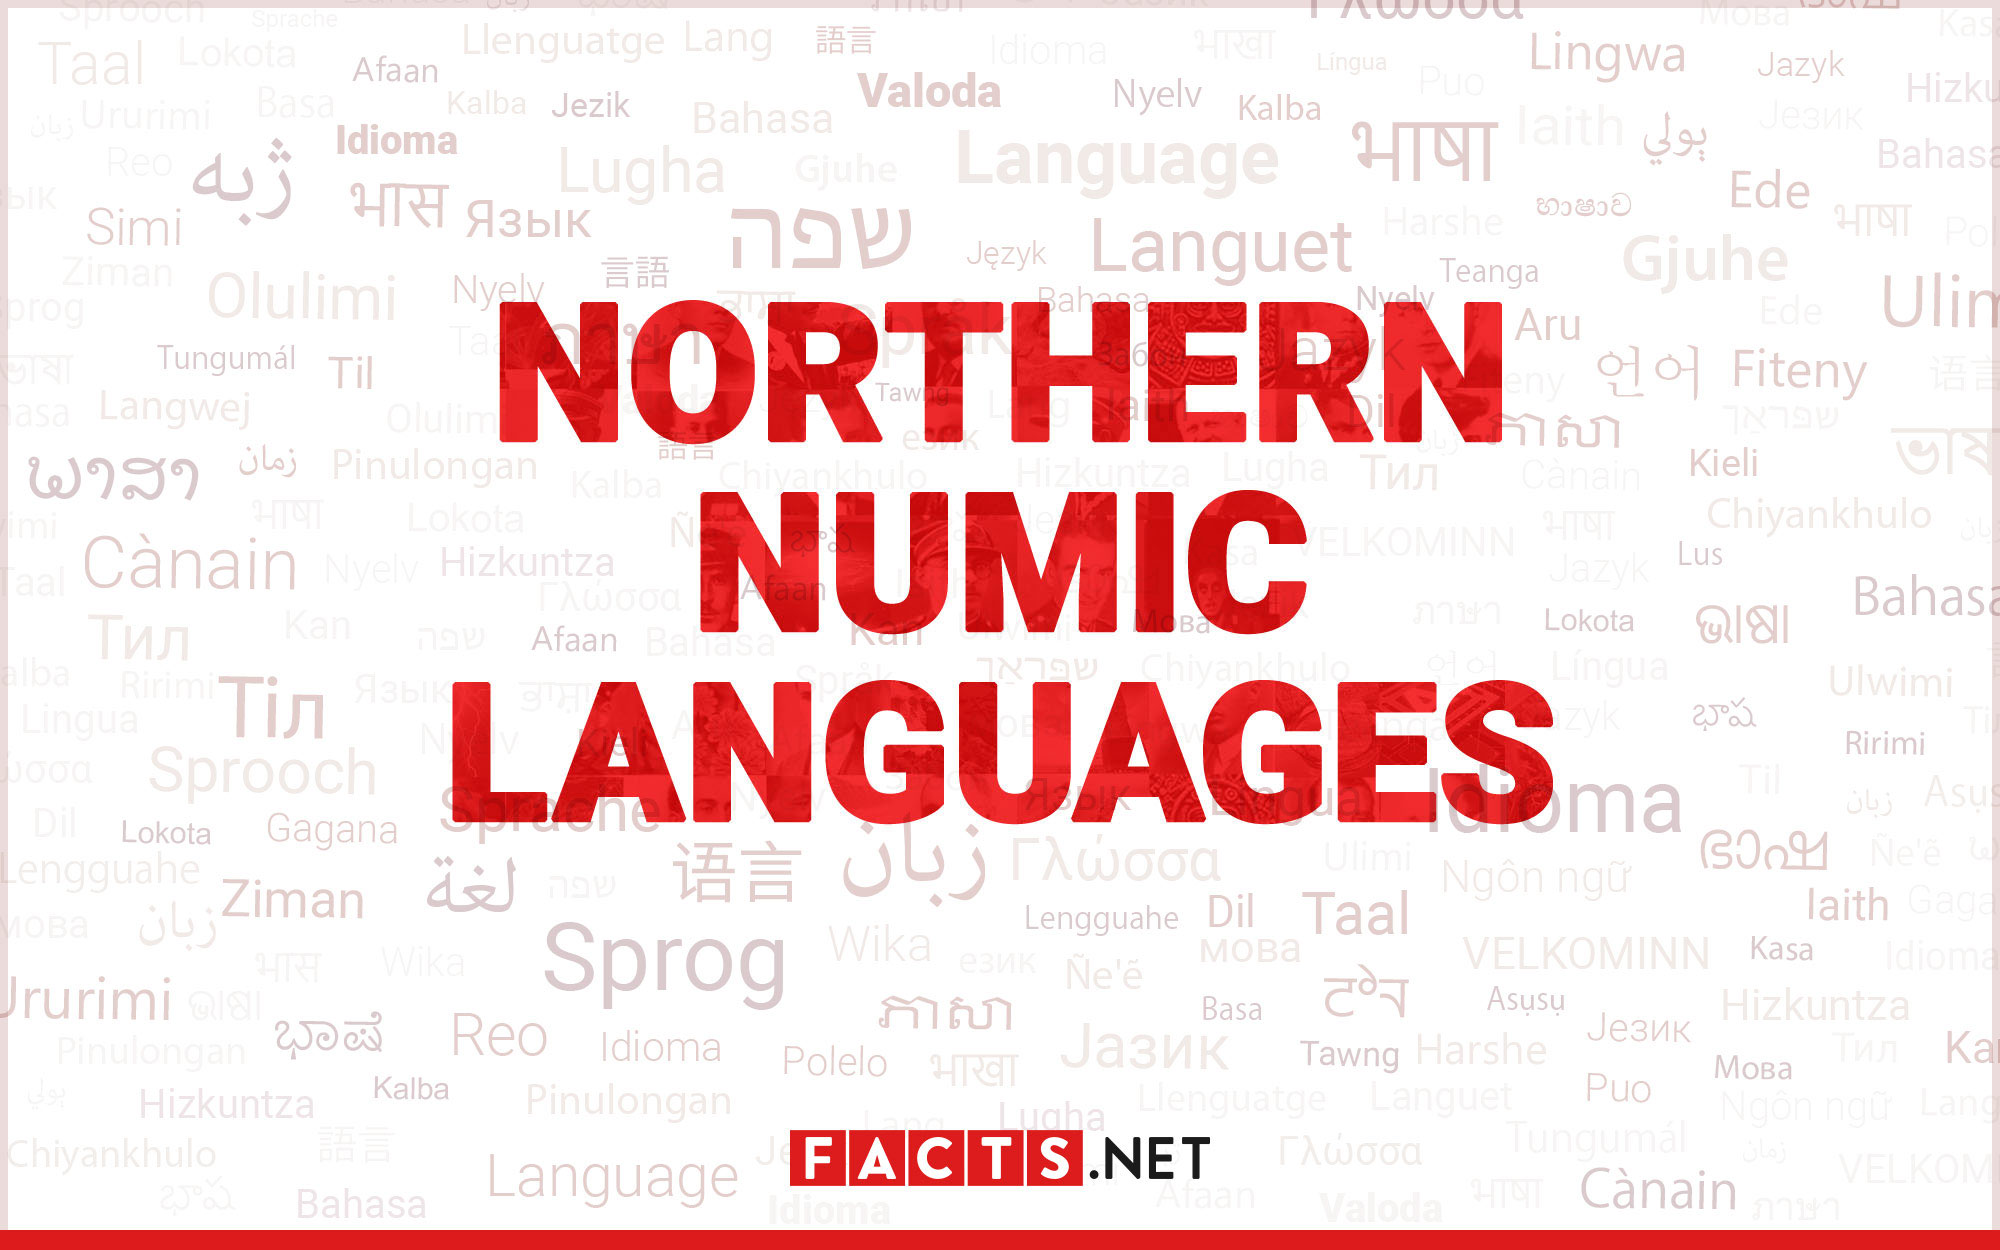 Language – facts and figures